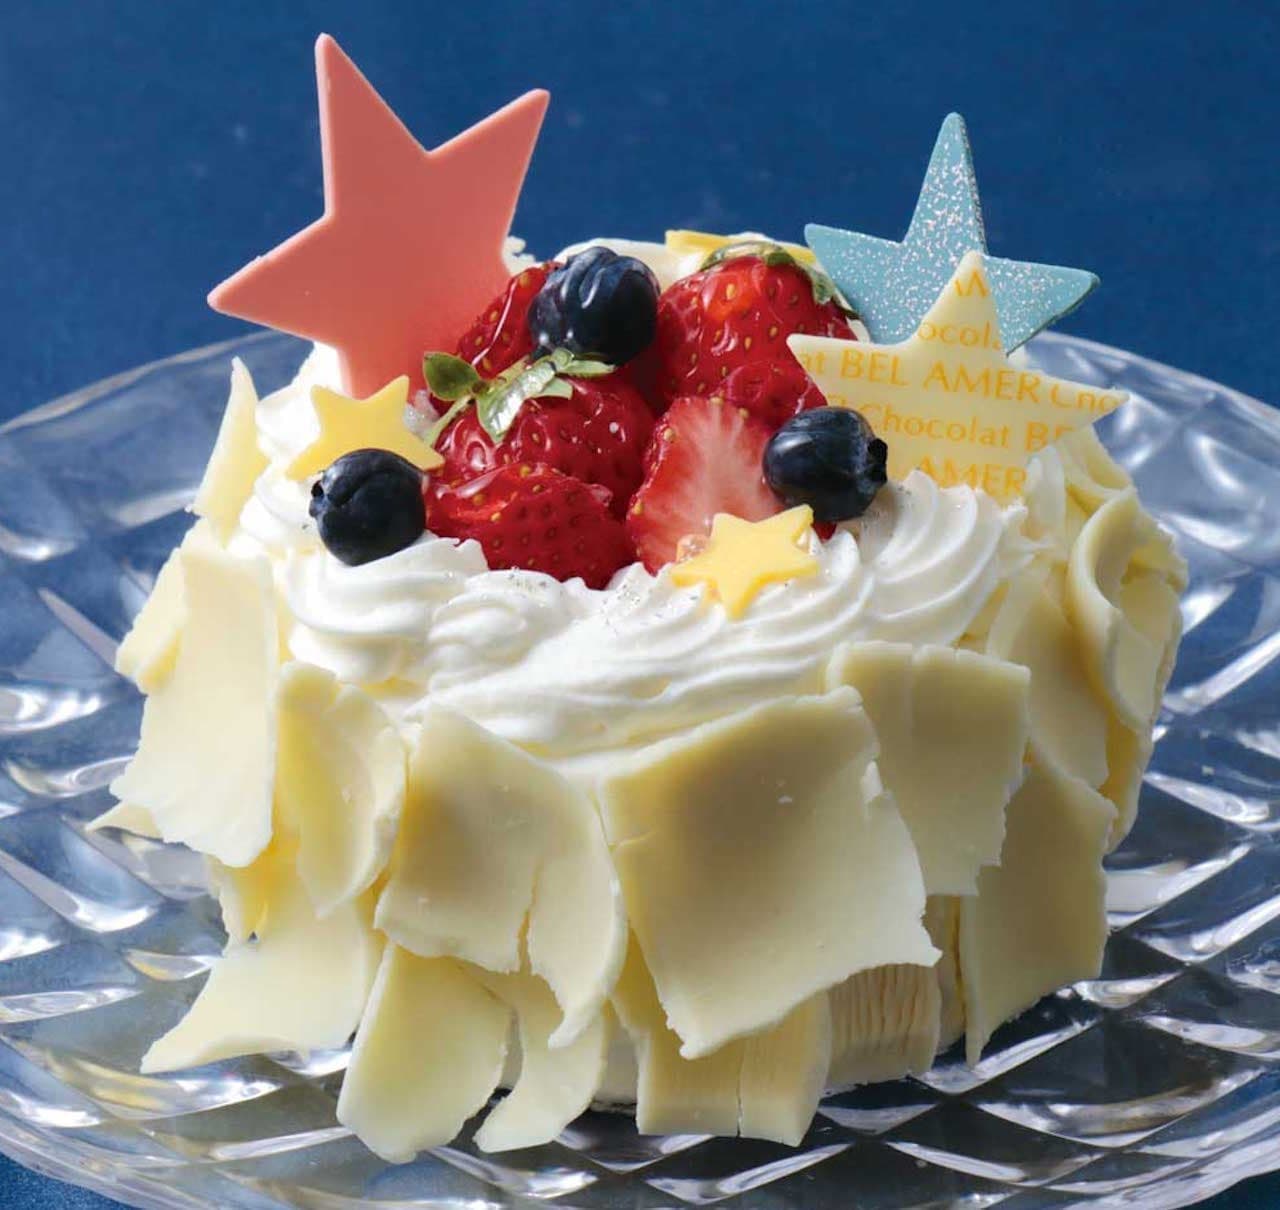 "Tanabata cake" for a limited time at Chocolat Bel Amer